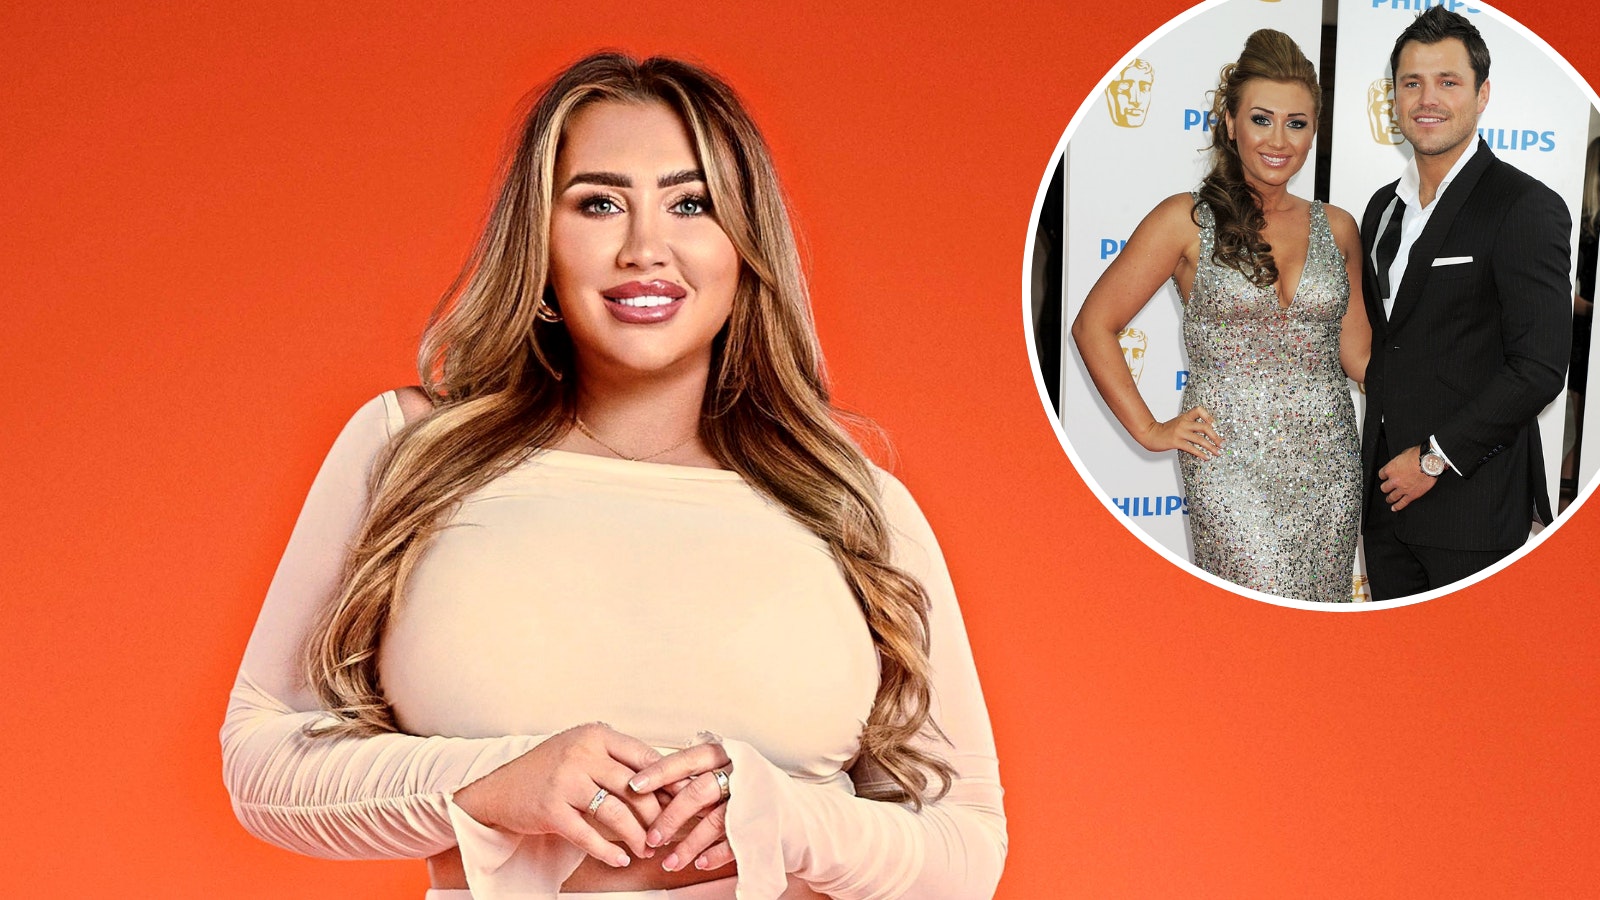 EXCLUSIVE: Lauren Goodger on Mark Wright’s affairs, ‘There were lots of women’